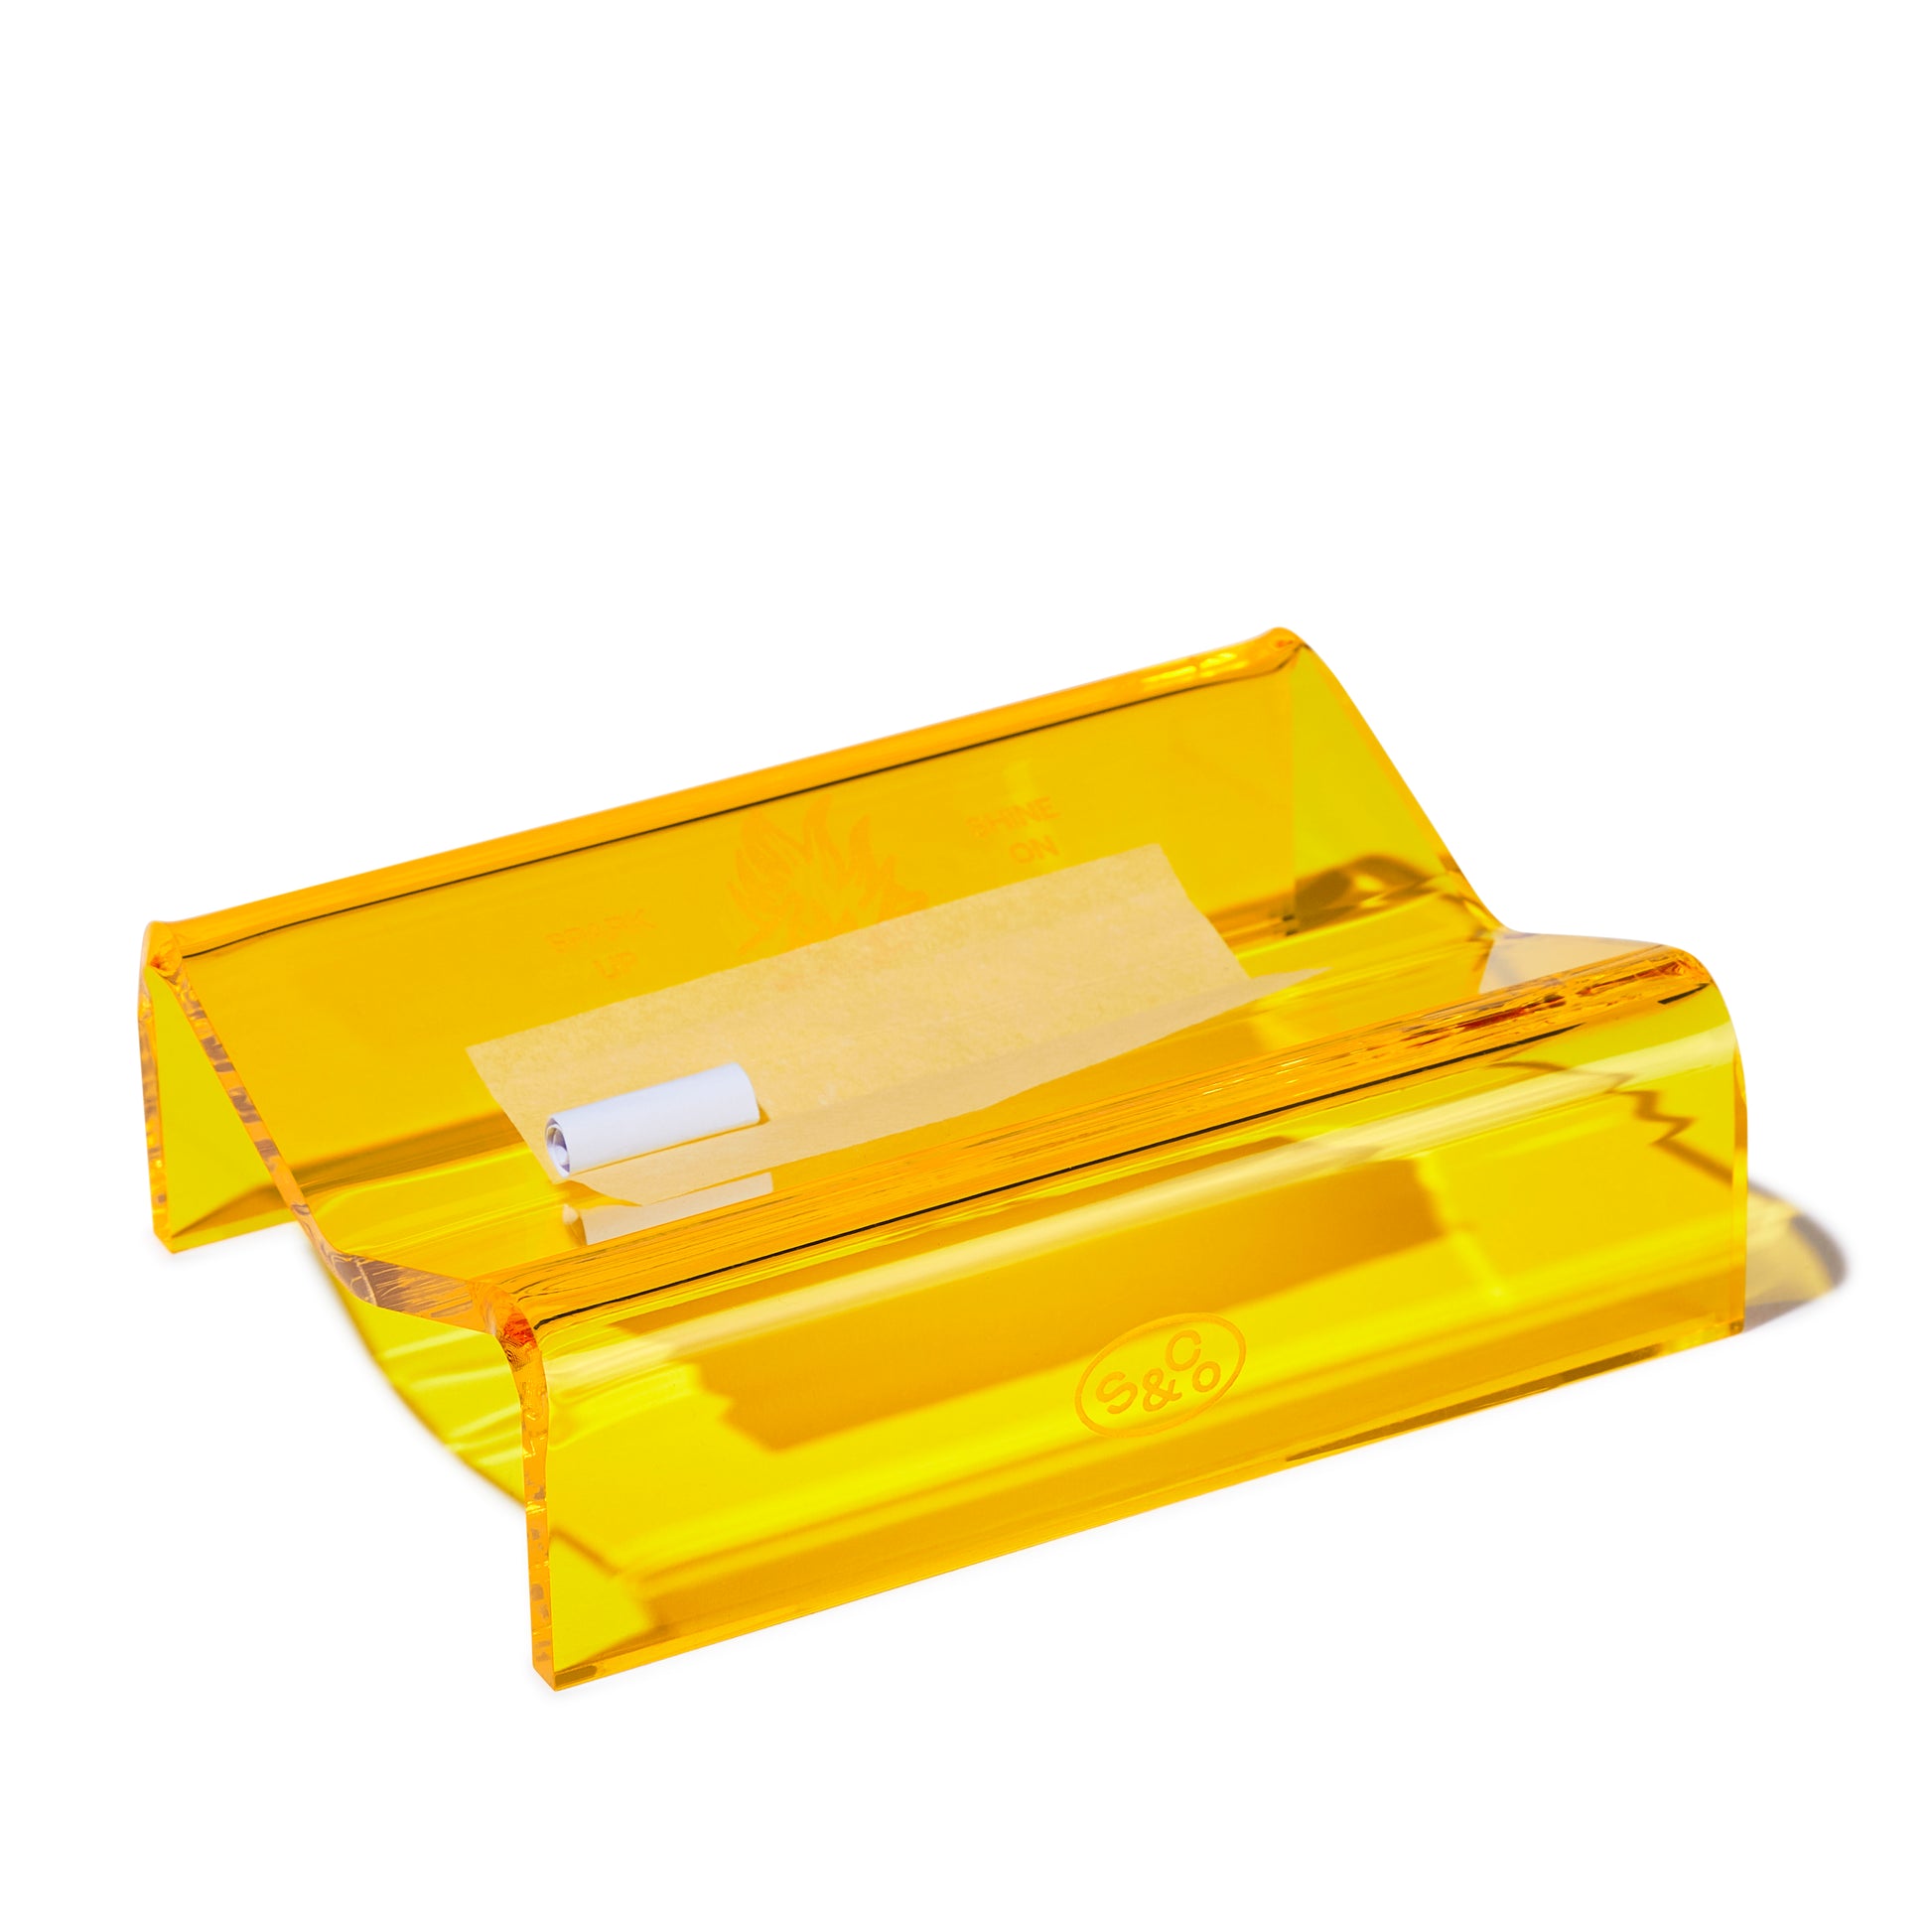 YELLOW GELLY ROLLING STAND - Sackville & Co.